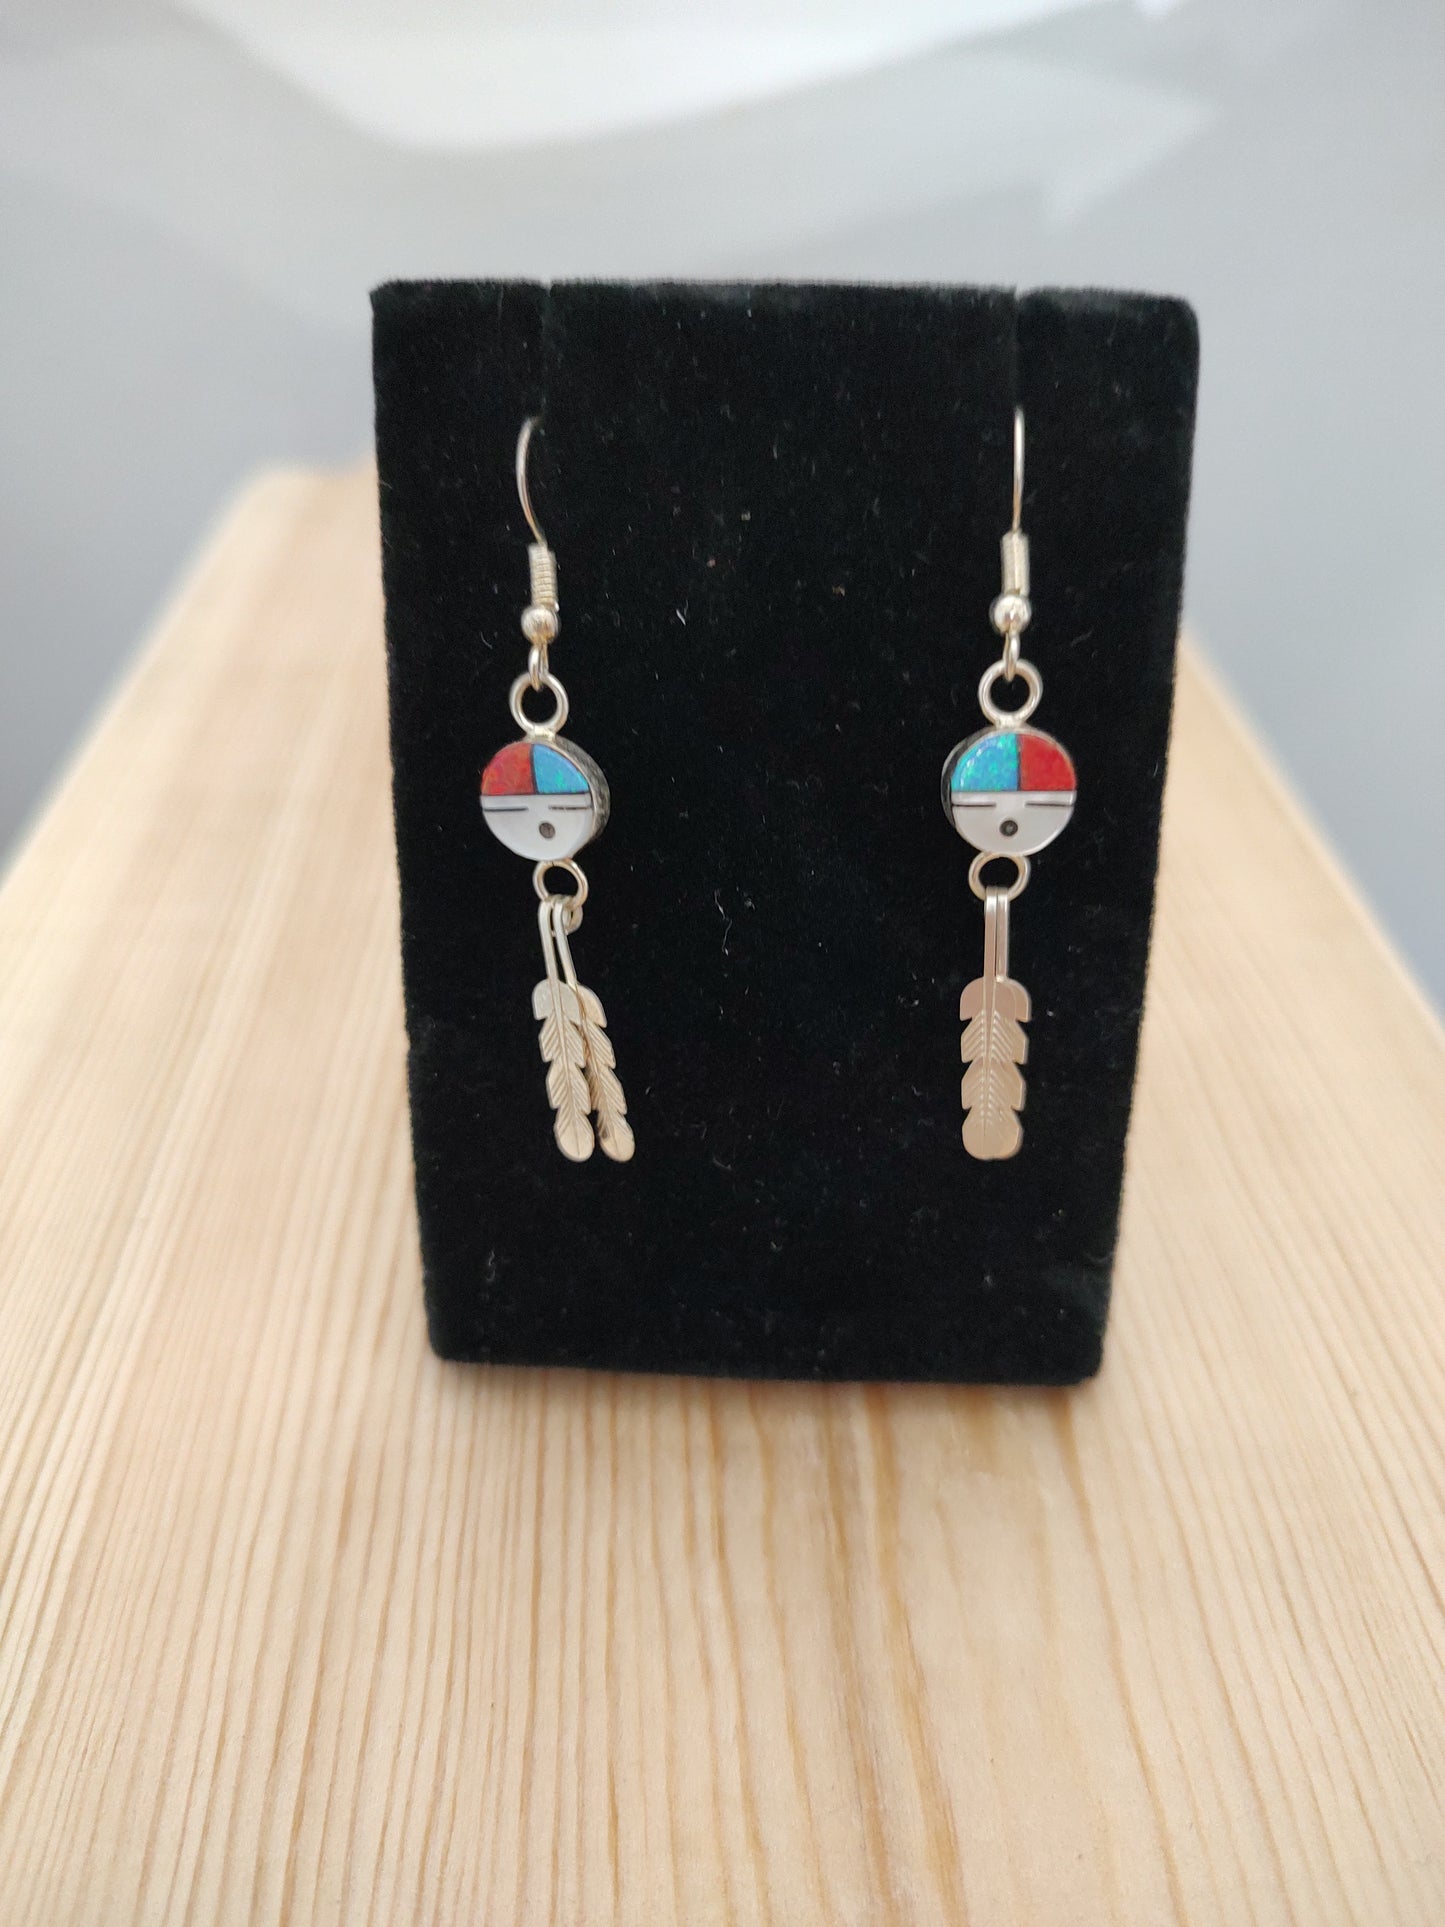 Mother of Pearl, Black Jet, Blue and Red Lab-Created Opal in Zuni Sun Face with Two Feathers on Hook Earrings